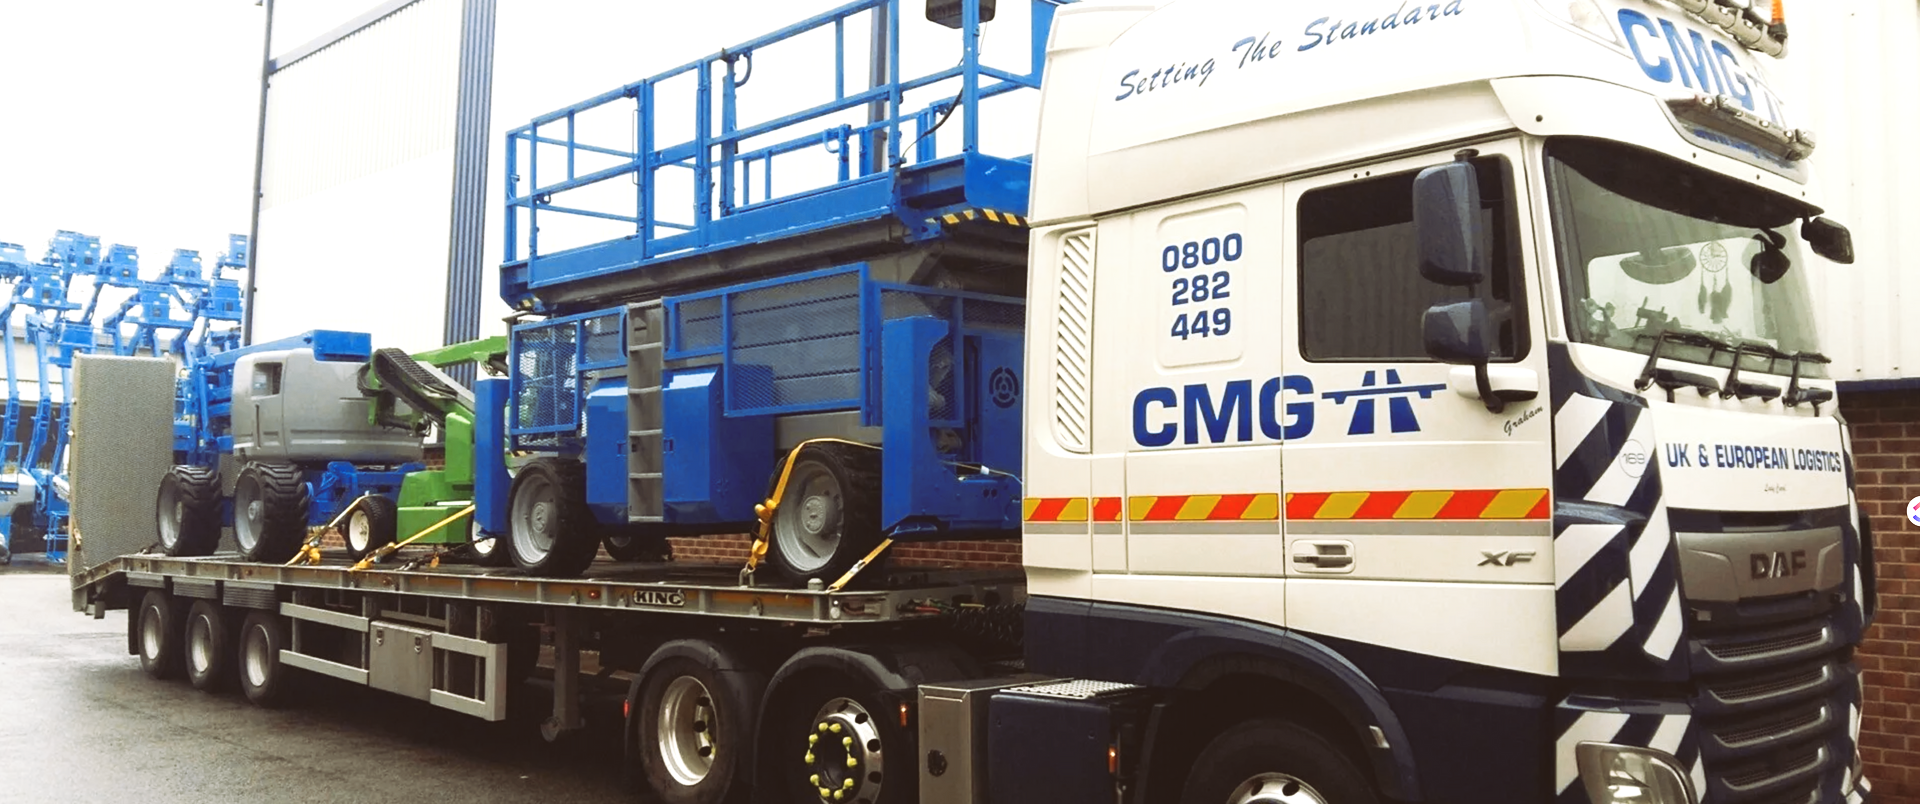 a large truck with the word cmg on the side